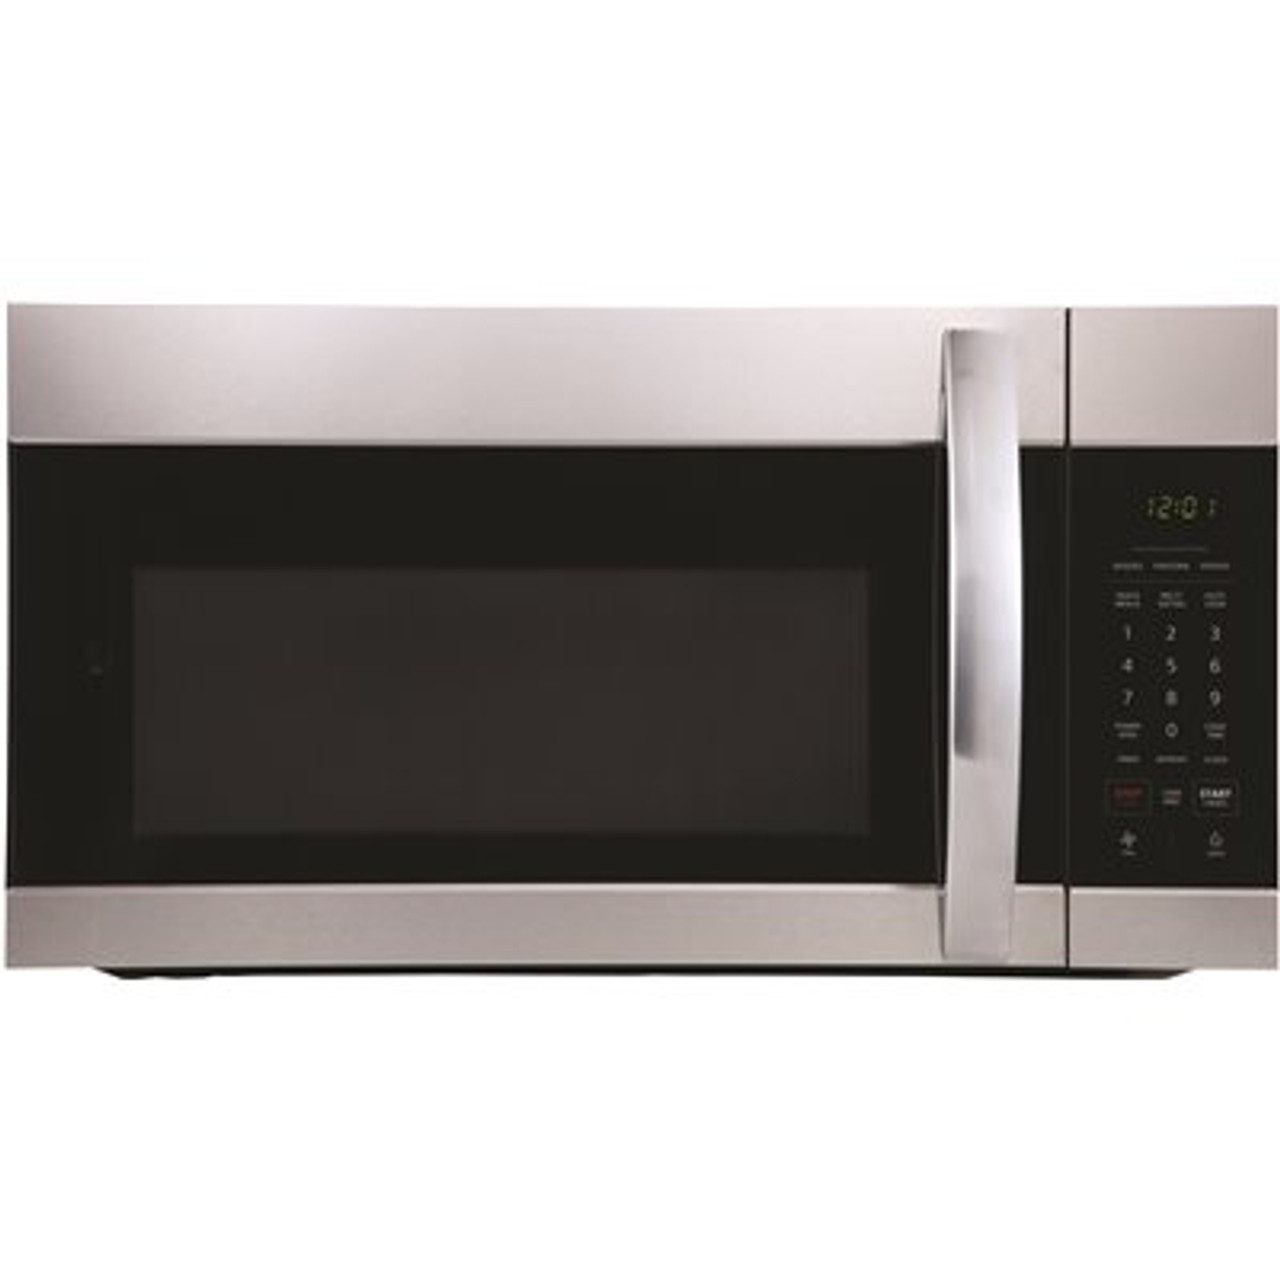 Seasons 1.7 cu ft Over the Range Microwave Stainless